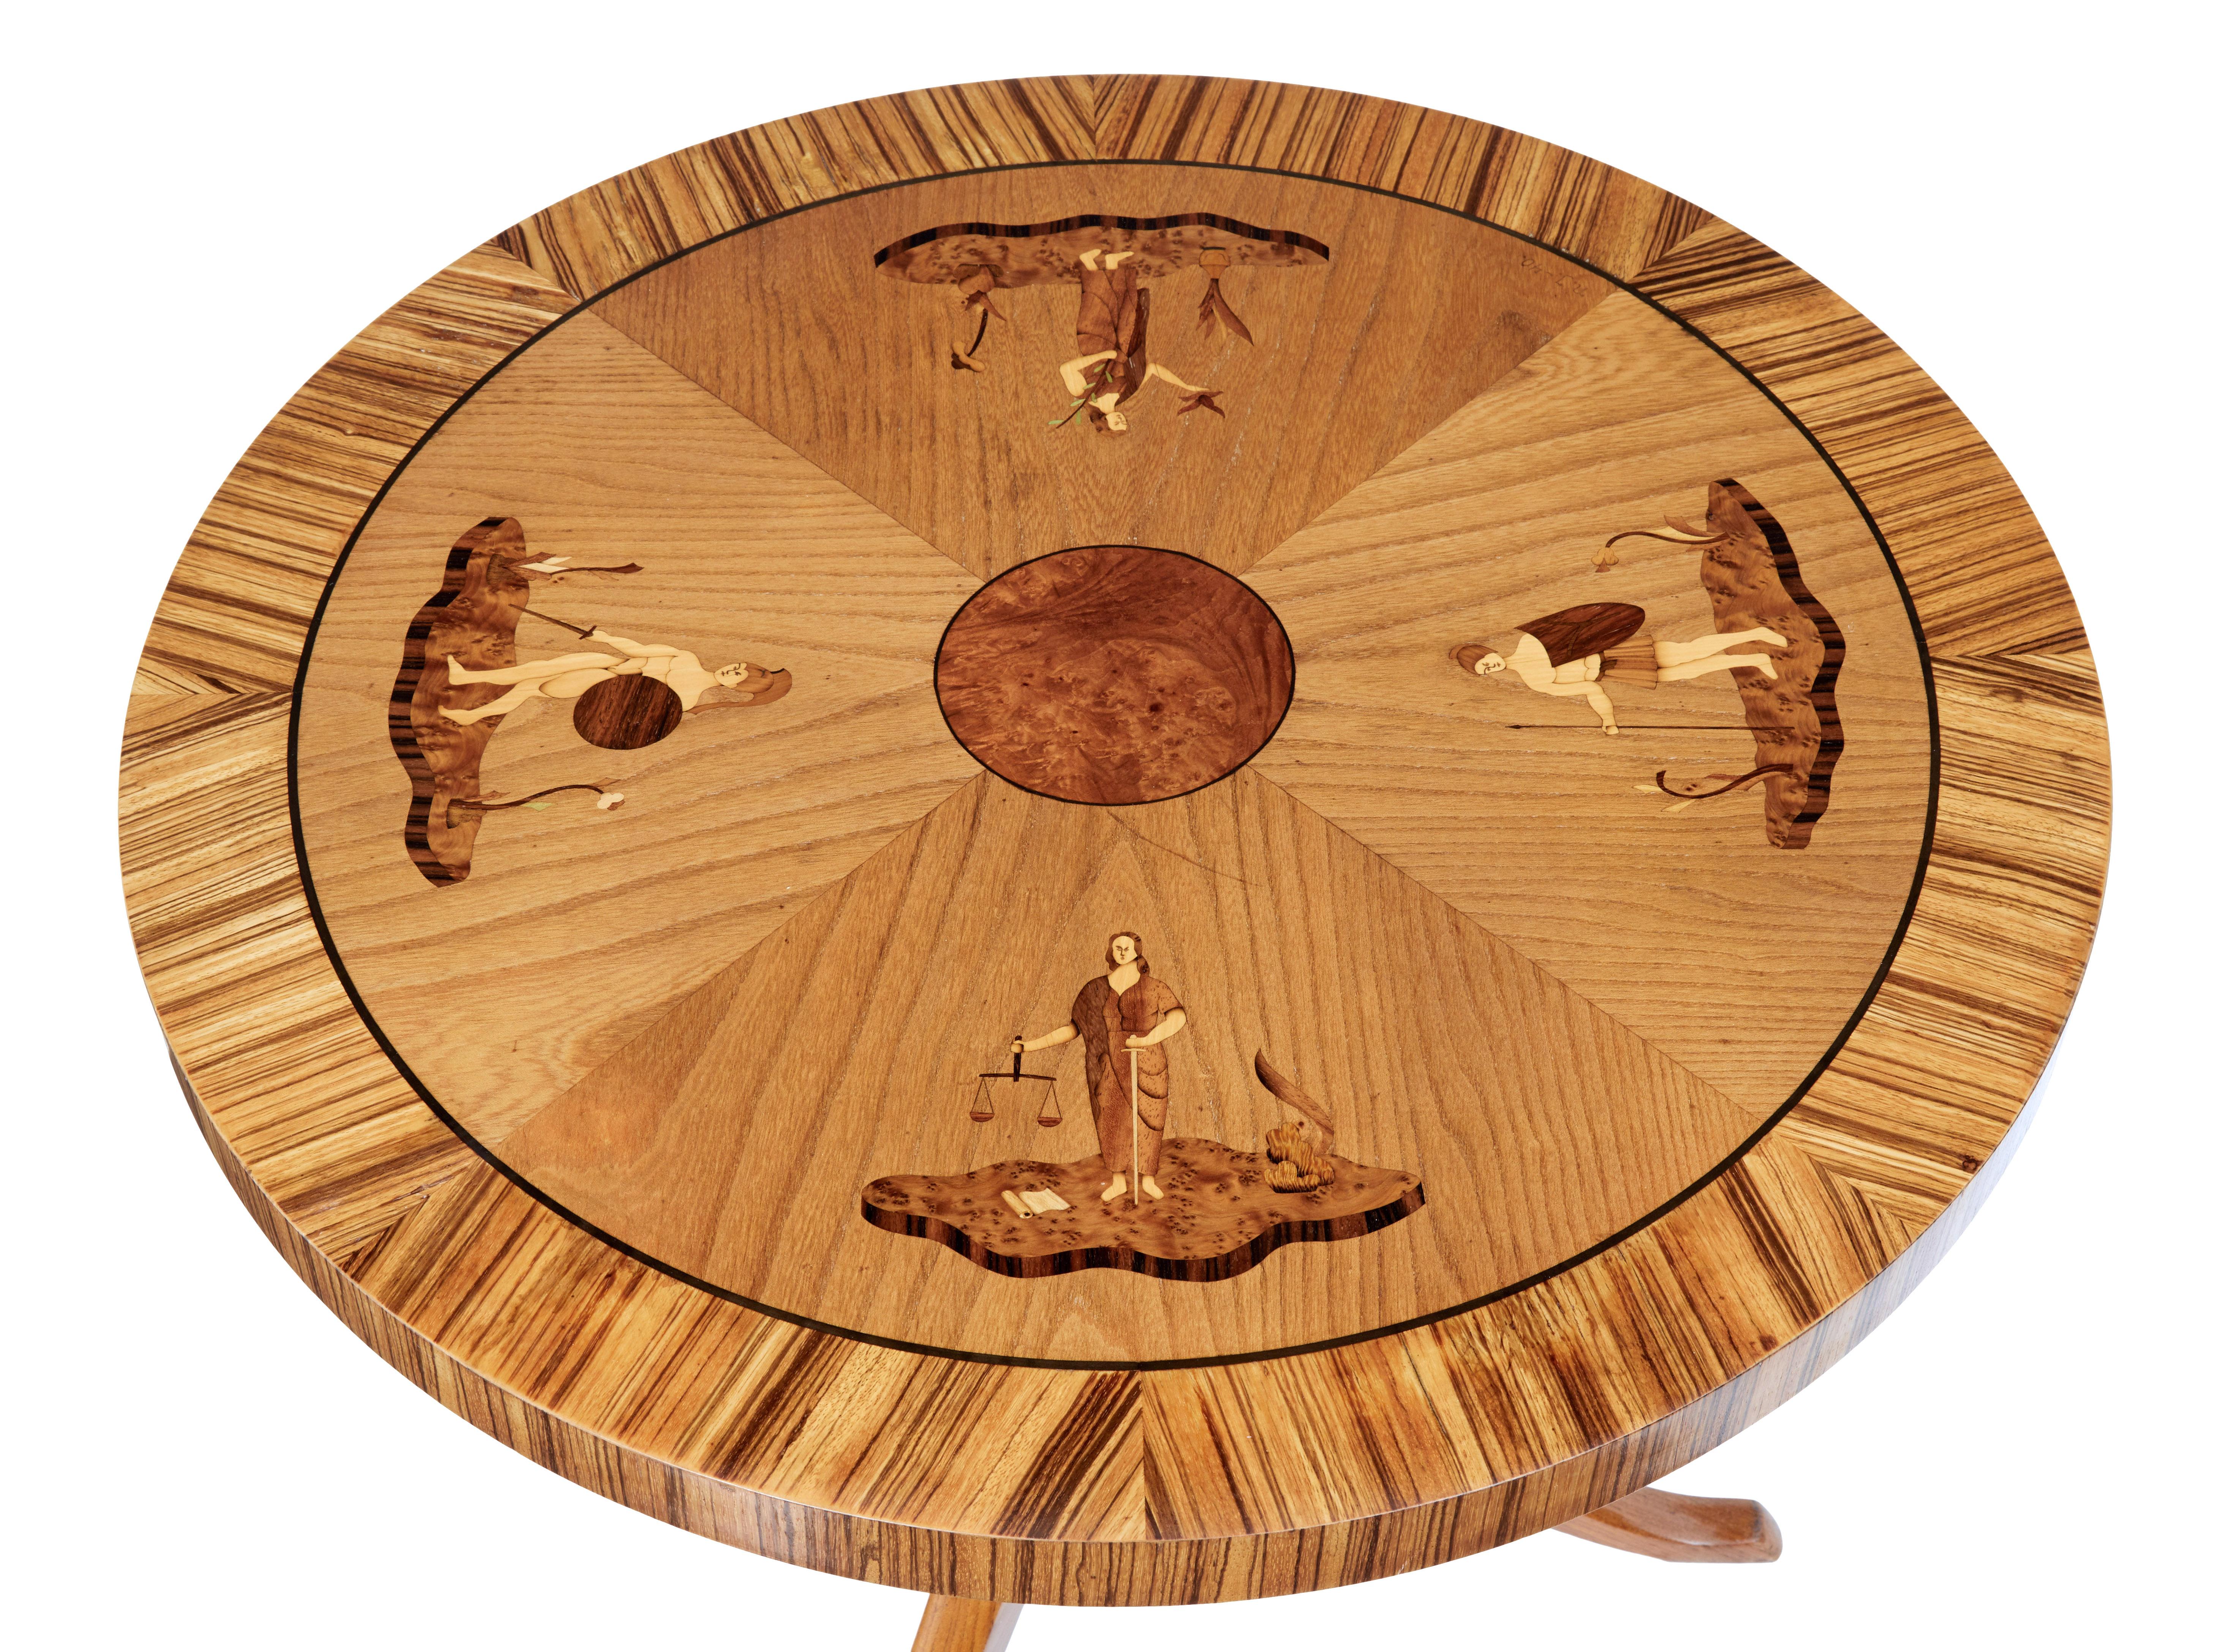 Late Art Deco Scandinavian coffee table, circa 1940.

Circular top, round burr center surrounded by 4 mythical women on each quarter. Inlaid with walnut, rosewood and pear wood. Signed n.J with the date of '40.

Standing on an elm stem, 3 legs